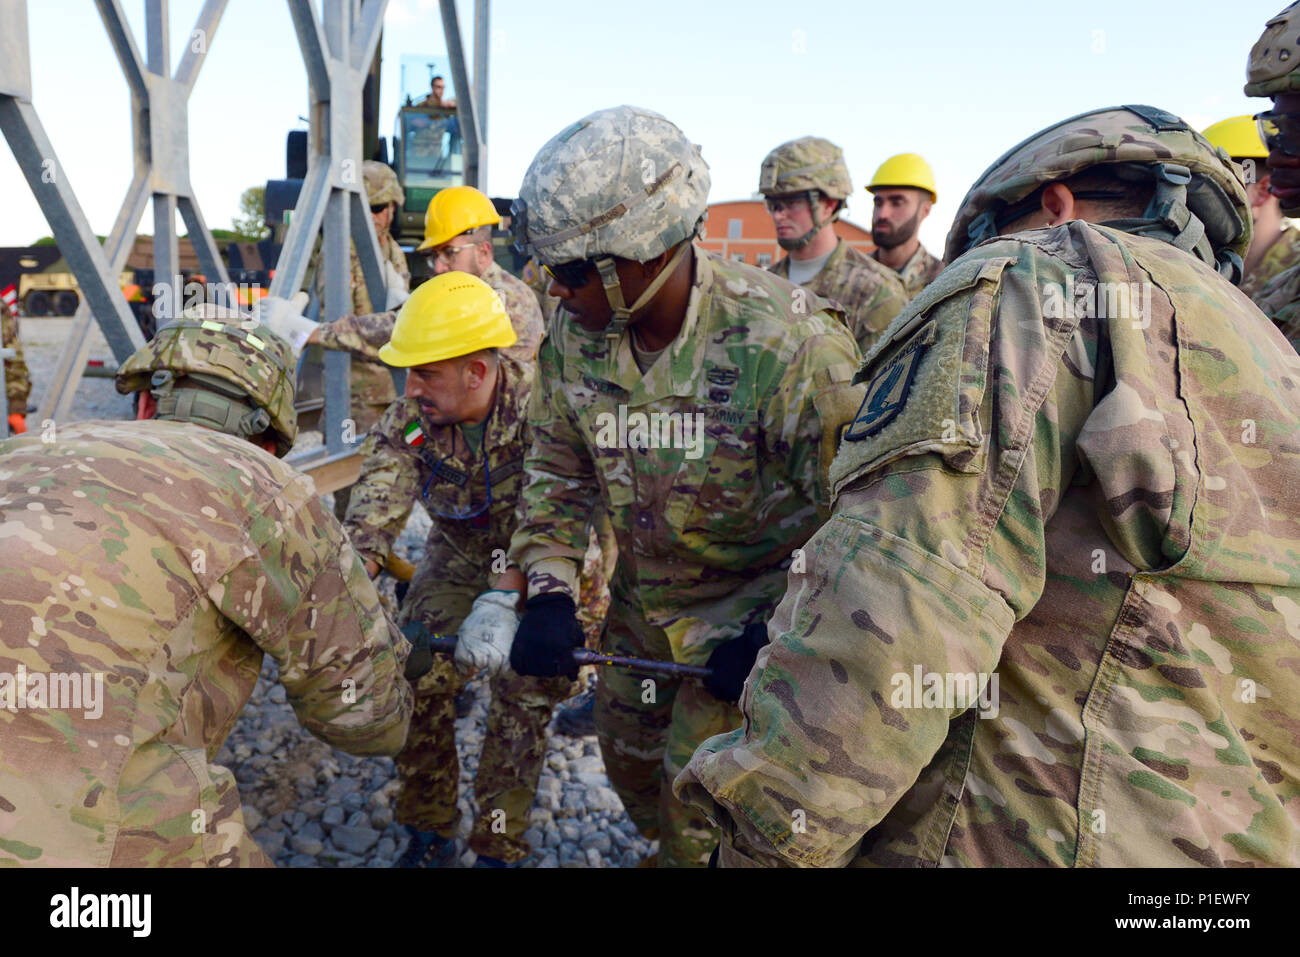 U.S. Army paratroopers assigned to the 173rd Airborne Brigade, 54th Brigade Engineer Battalion and Italian army soldiers from the 2nd Engineer Regiment Pointieri Piacenza, work together to assemble the pieces of the bridge during the Exercise Livorno Shock in Leghorn Army  DEPOT, Italy, Oct. 22, 2016. Livorno Shock is a combined readiness exercise designed to familiarize U.S. paratroopers with river crossing capabilities and is led by the Italian Army’s 2nd Engineer Regiment Pointieri. The 173rd Airborne Brigade is the U.S. Army's Contingency Response Force in Europe, providing rapidly-deployi Stock Photo